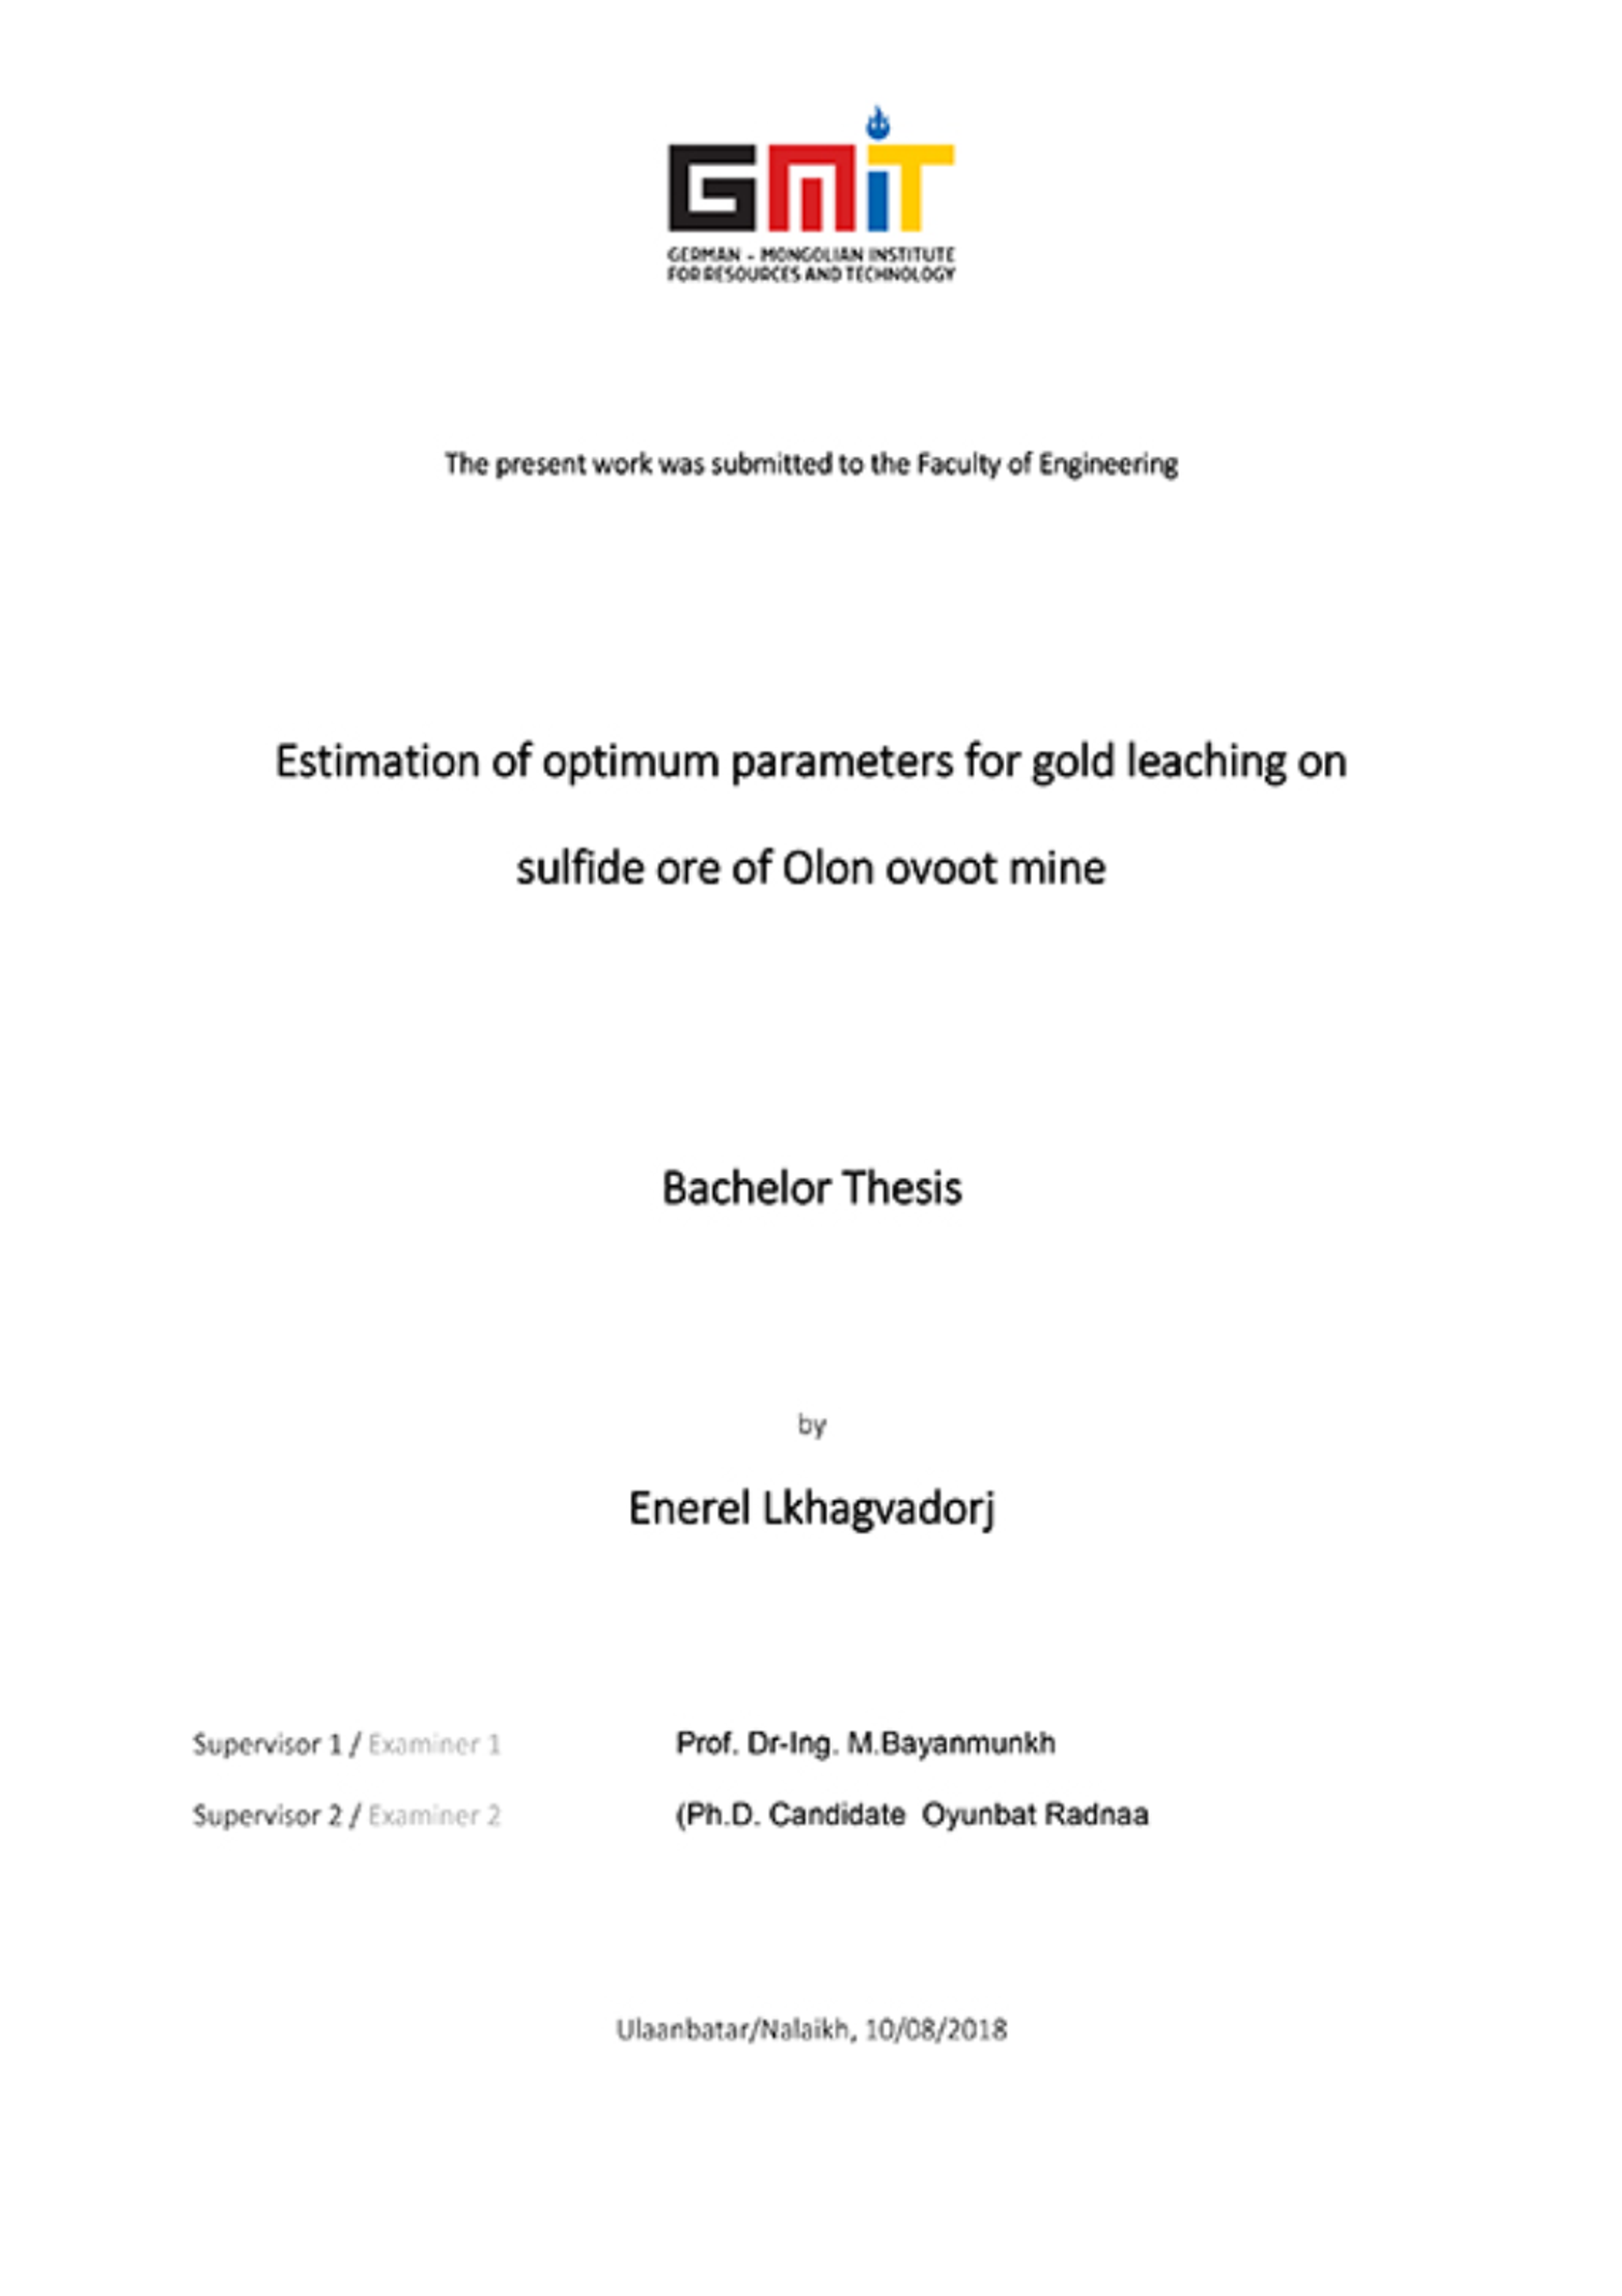 Estimation of optimum parameters for gold leaching on sulfide ore of Olon ovoot mine